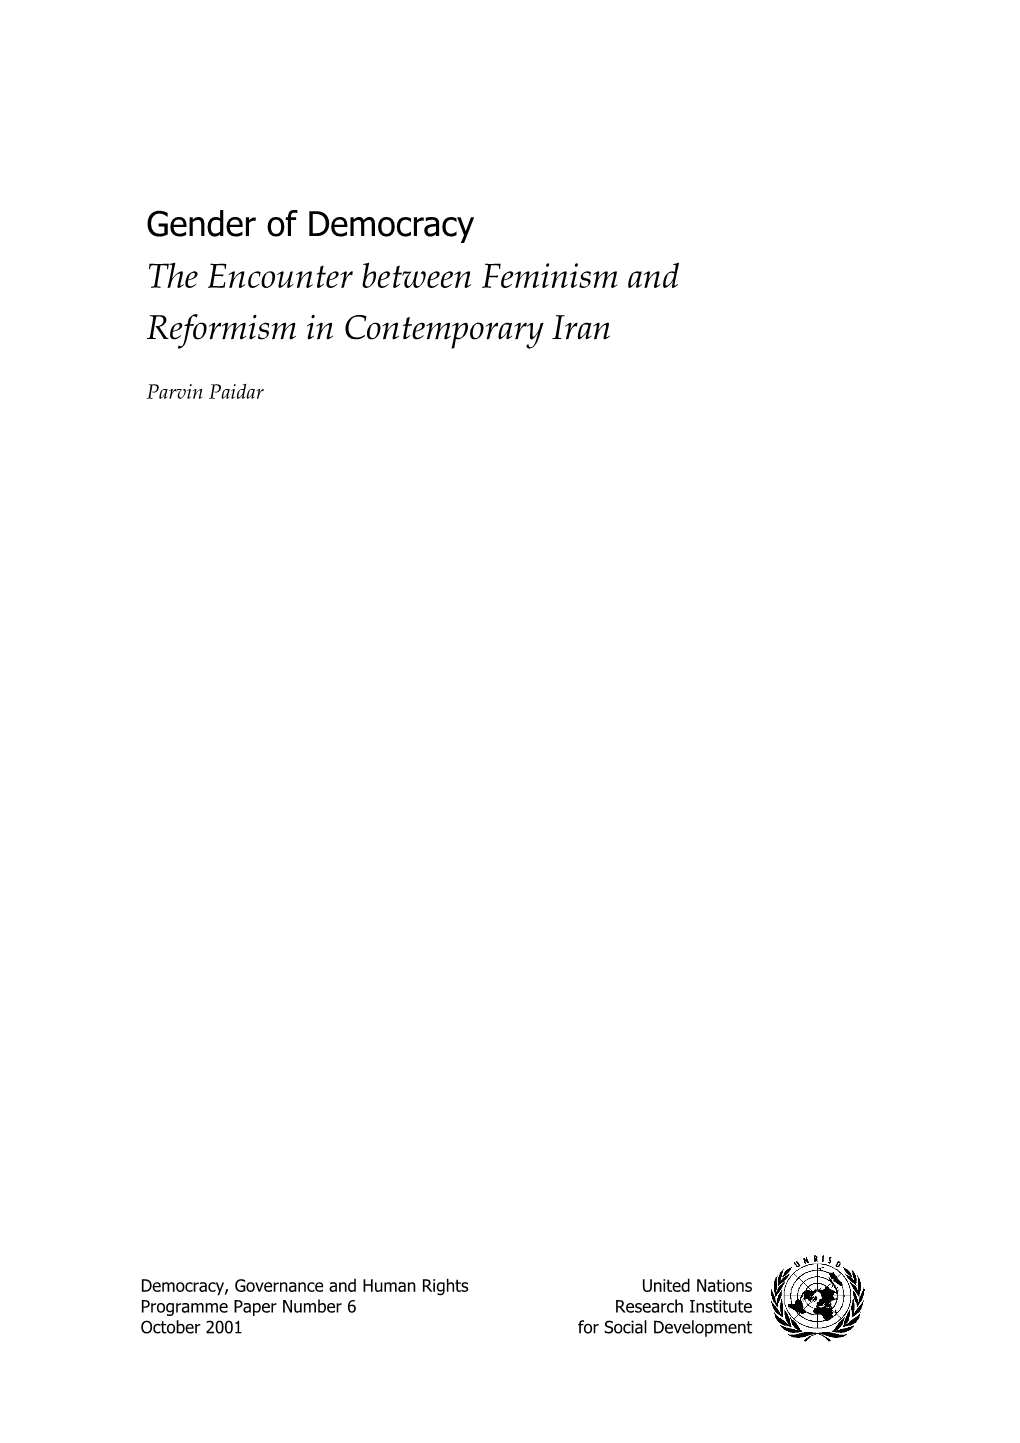 GENDER of DEMOCRACY: the ENCOUNTER BETWEEN FEMINISM and REFORMISM in CONTEMPORARY IRAN PARVIN PAIDAR Regime Into a Modern Revolutionary Political Force